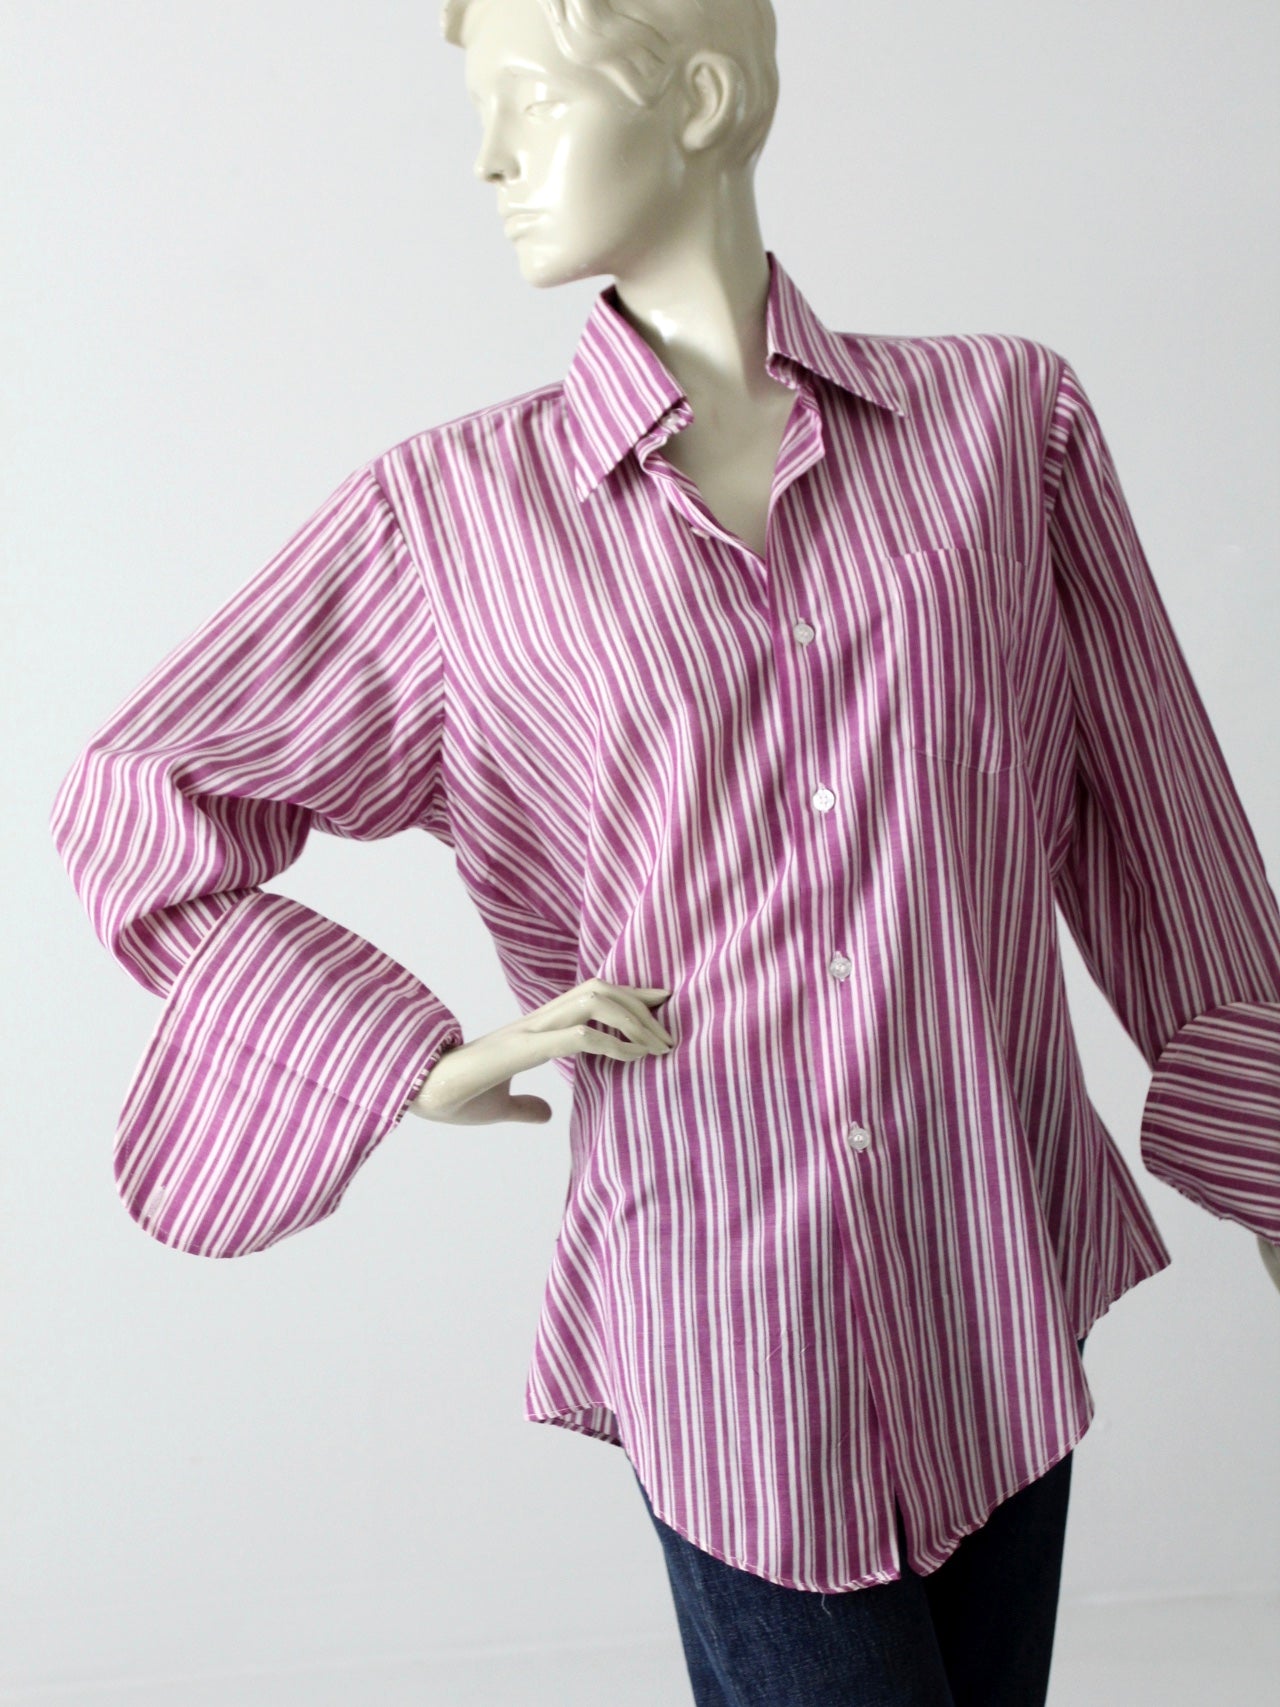 1960s men's button down shirt with french cuffs